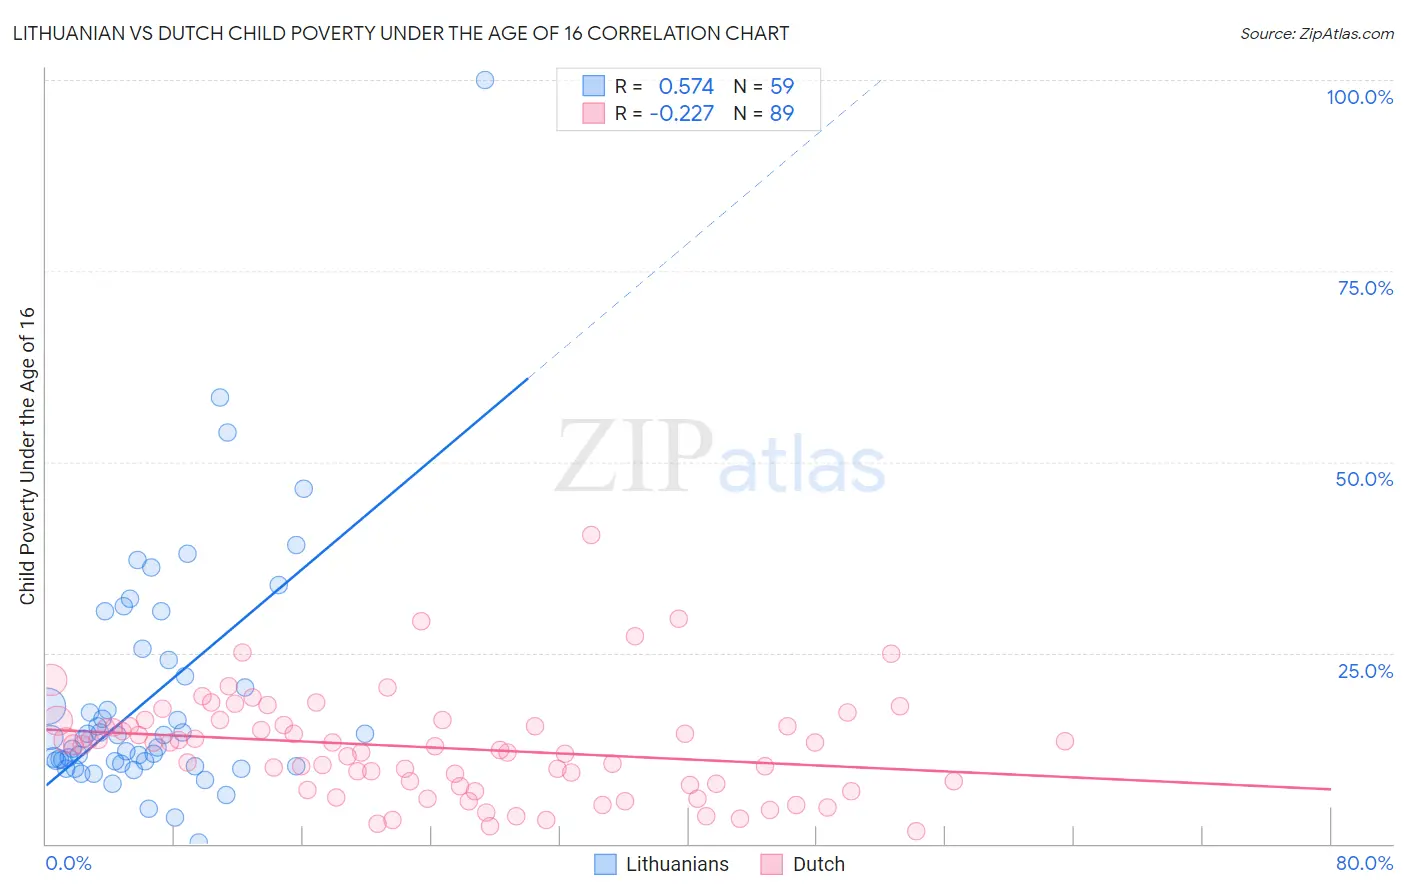 Lithuanian vs Dutch Child Poverty Under the Age of 16